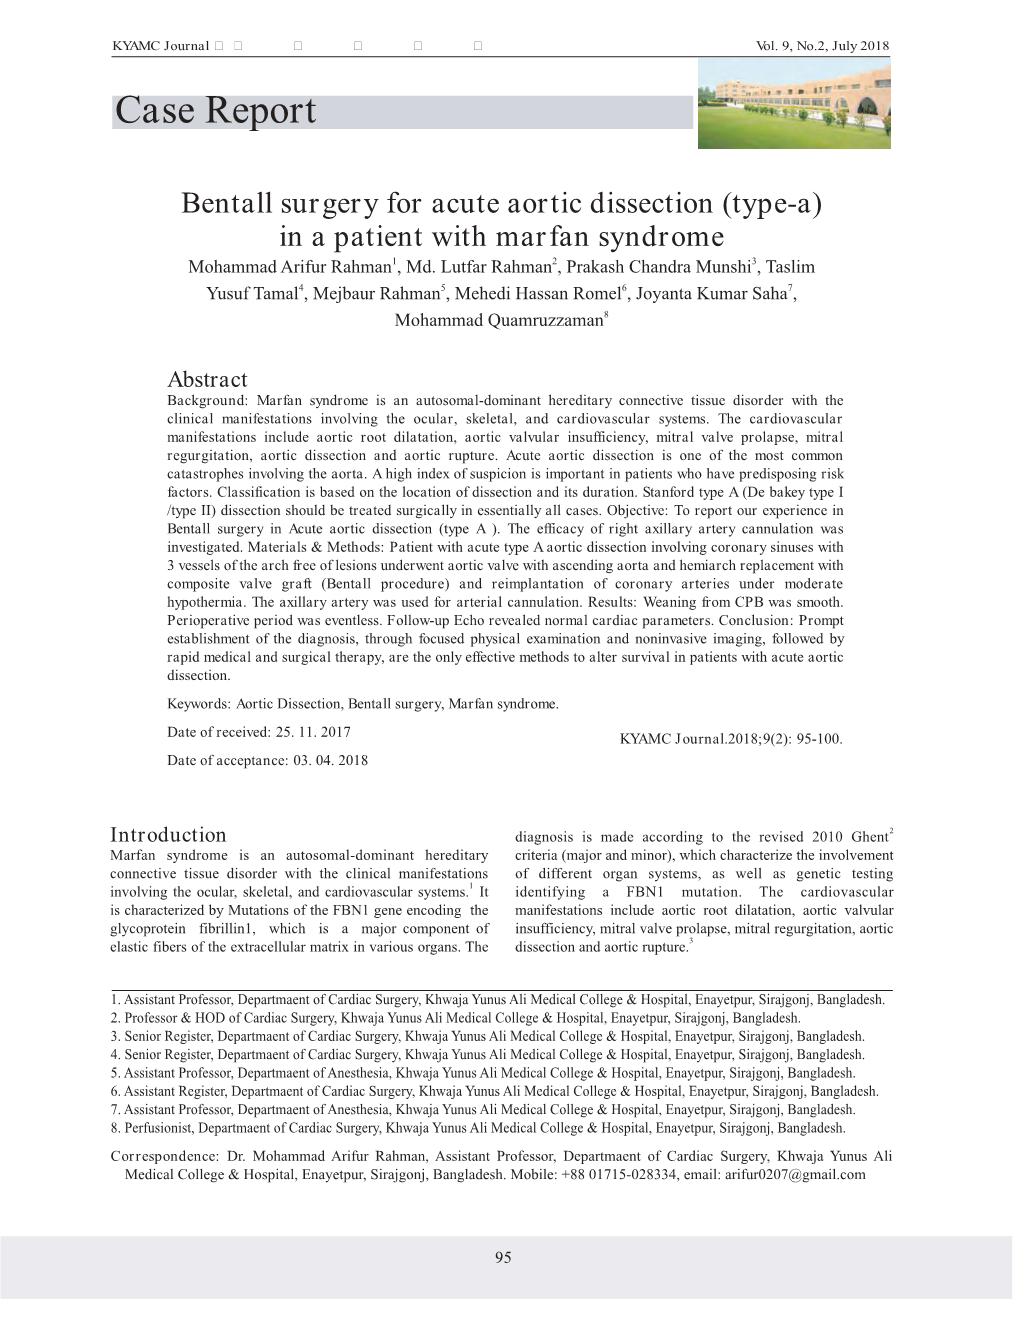 Case Report Bentall Surgery for Acute Aortic Dissection